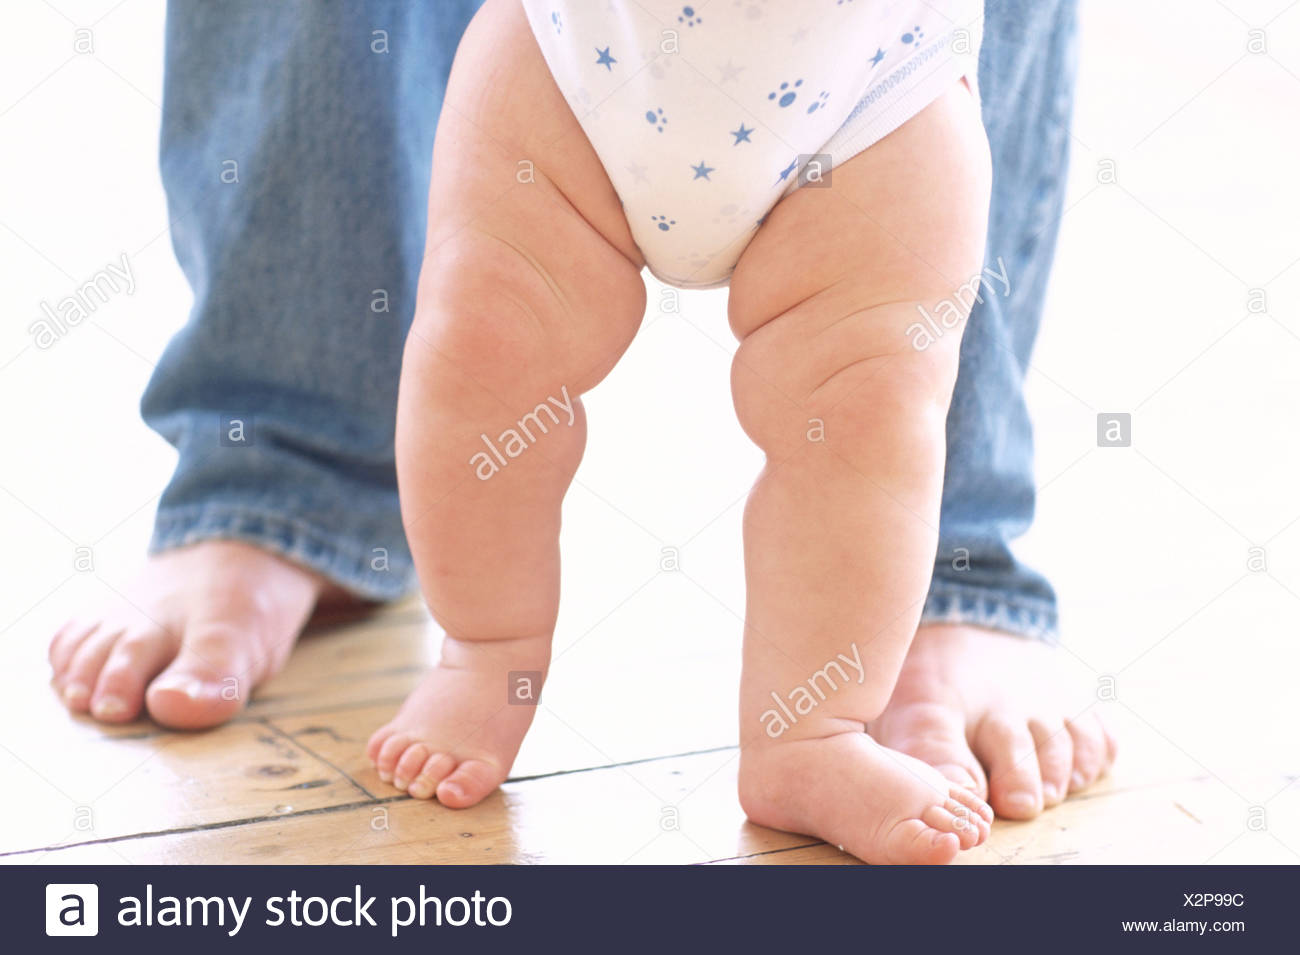 Baby's legs. Legs of a 6-month-old baby boy who is being supported ...